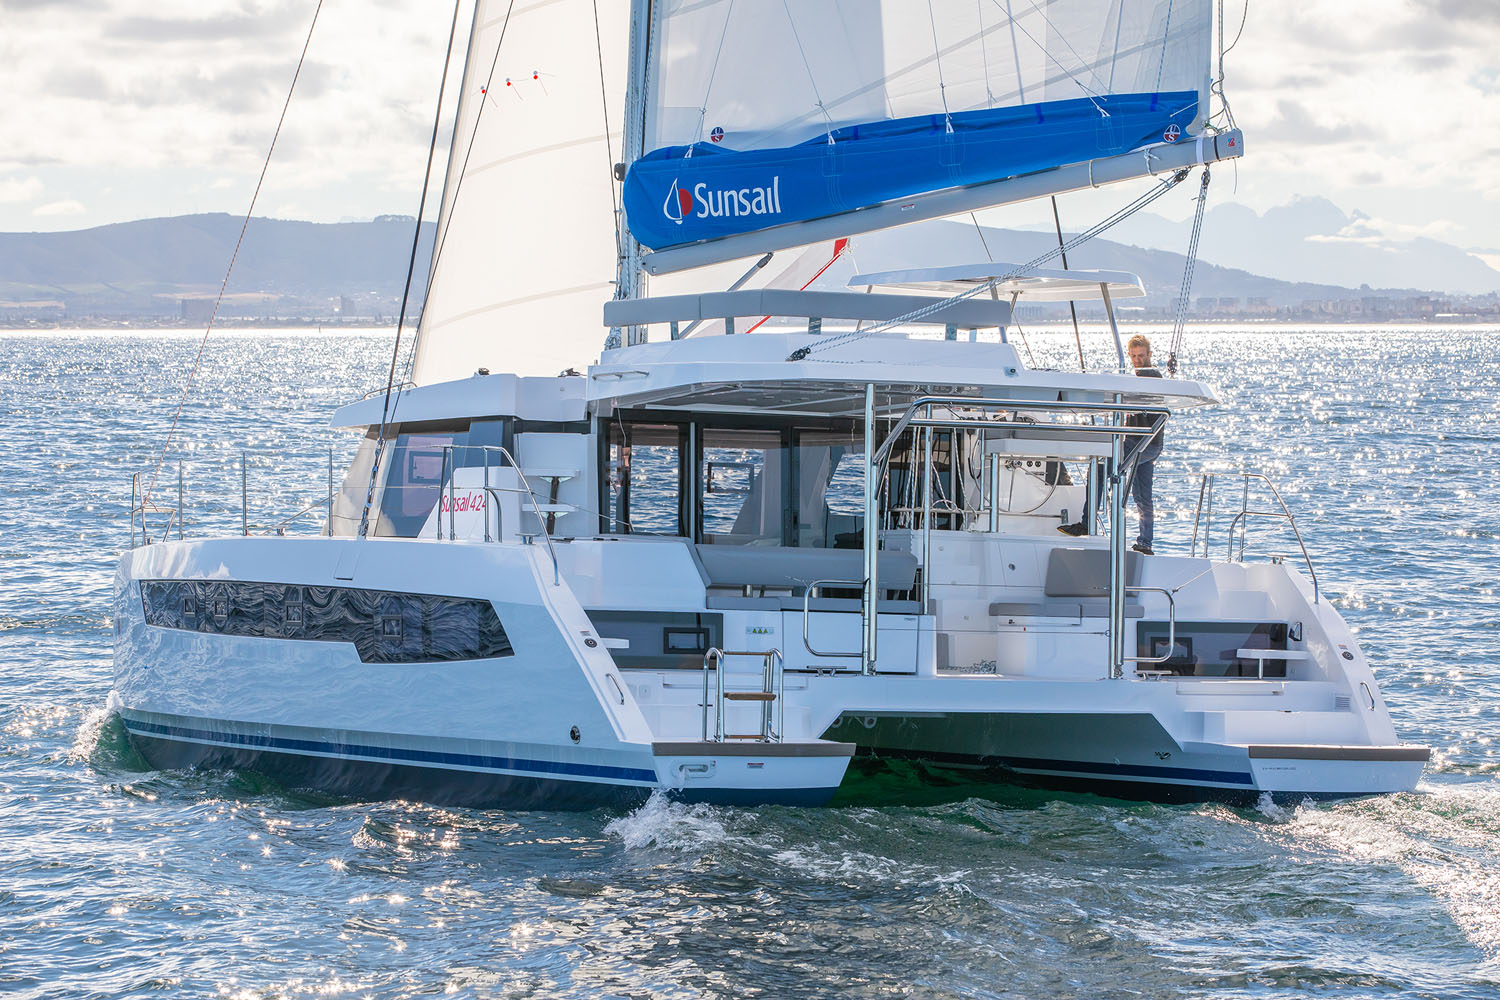 sunsail yacht investment